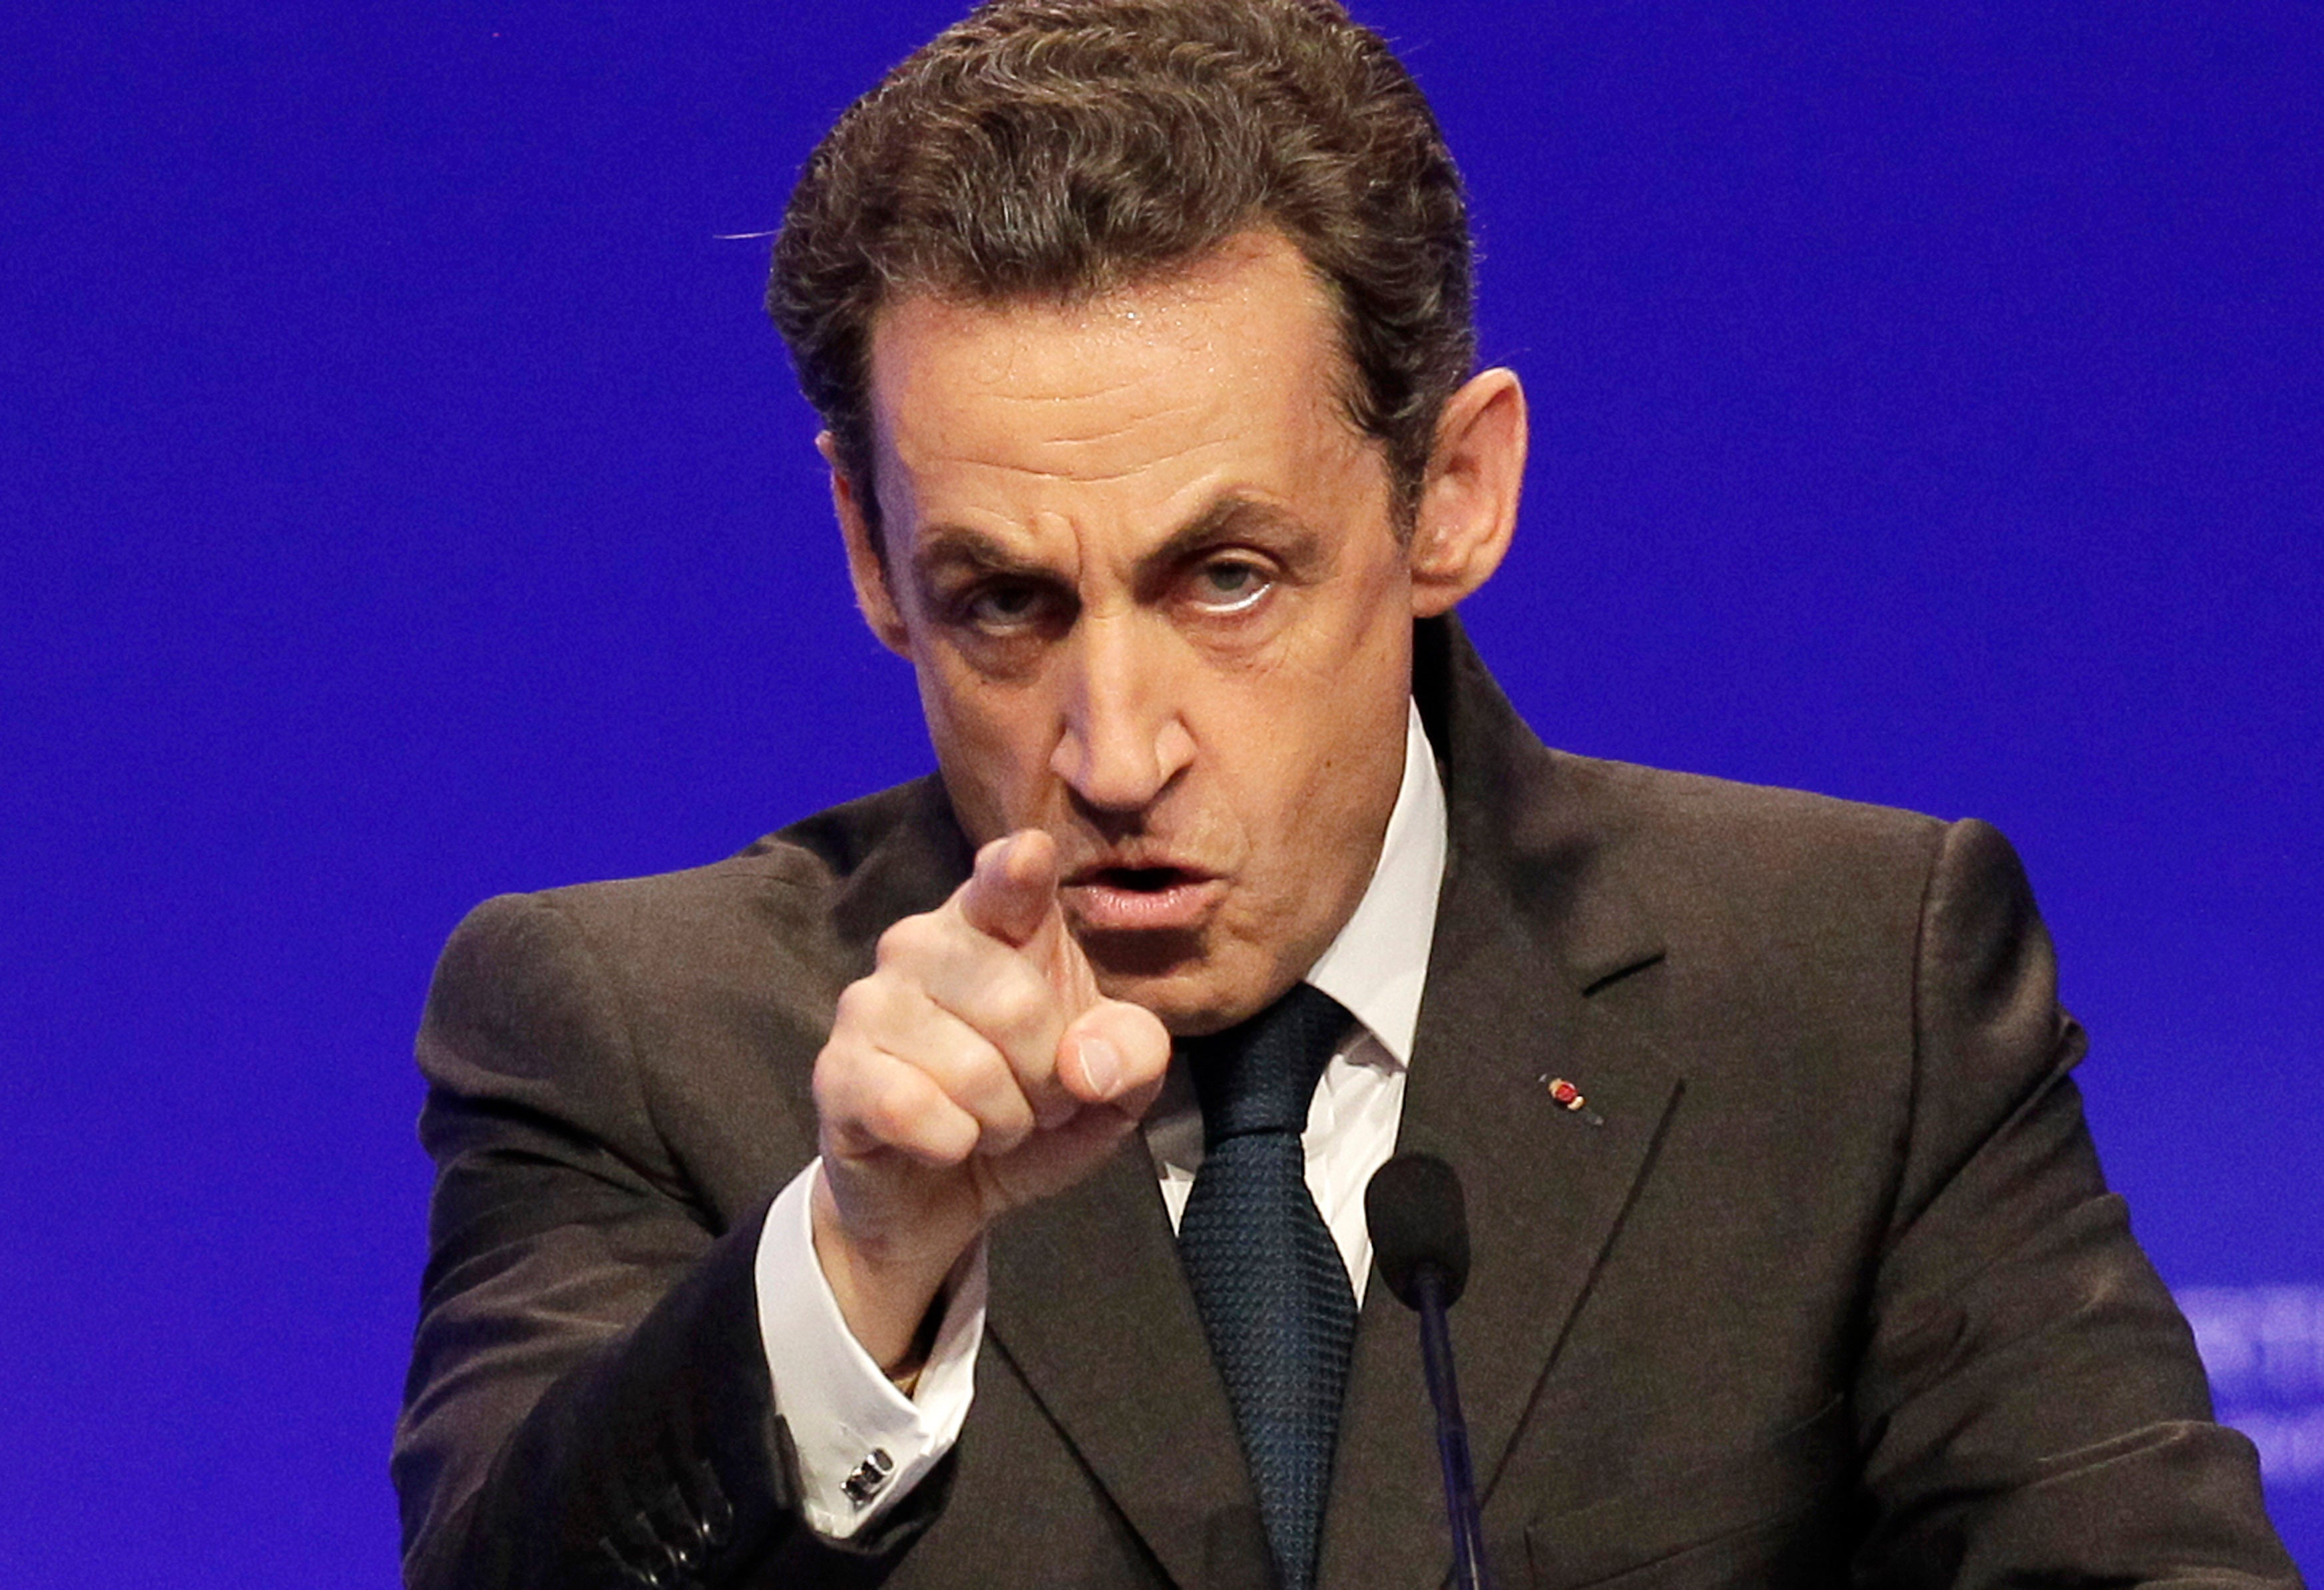 Sarkozy remains an influential figure on the French right